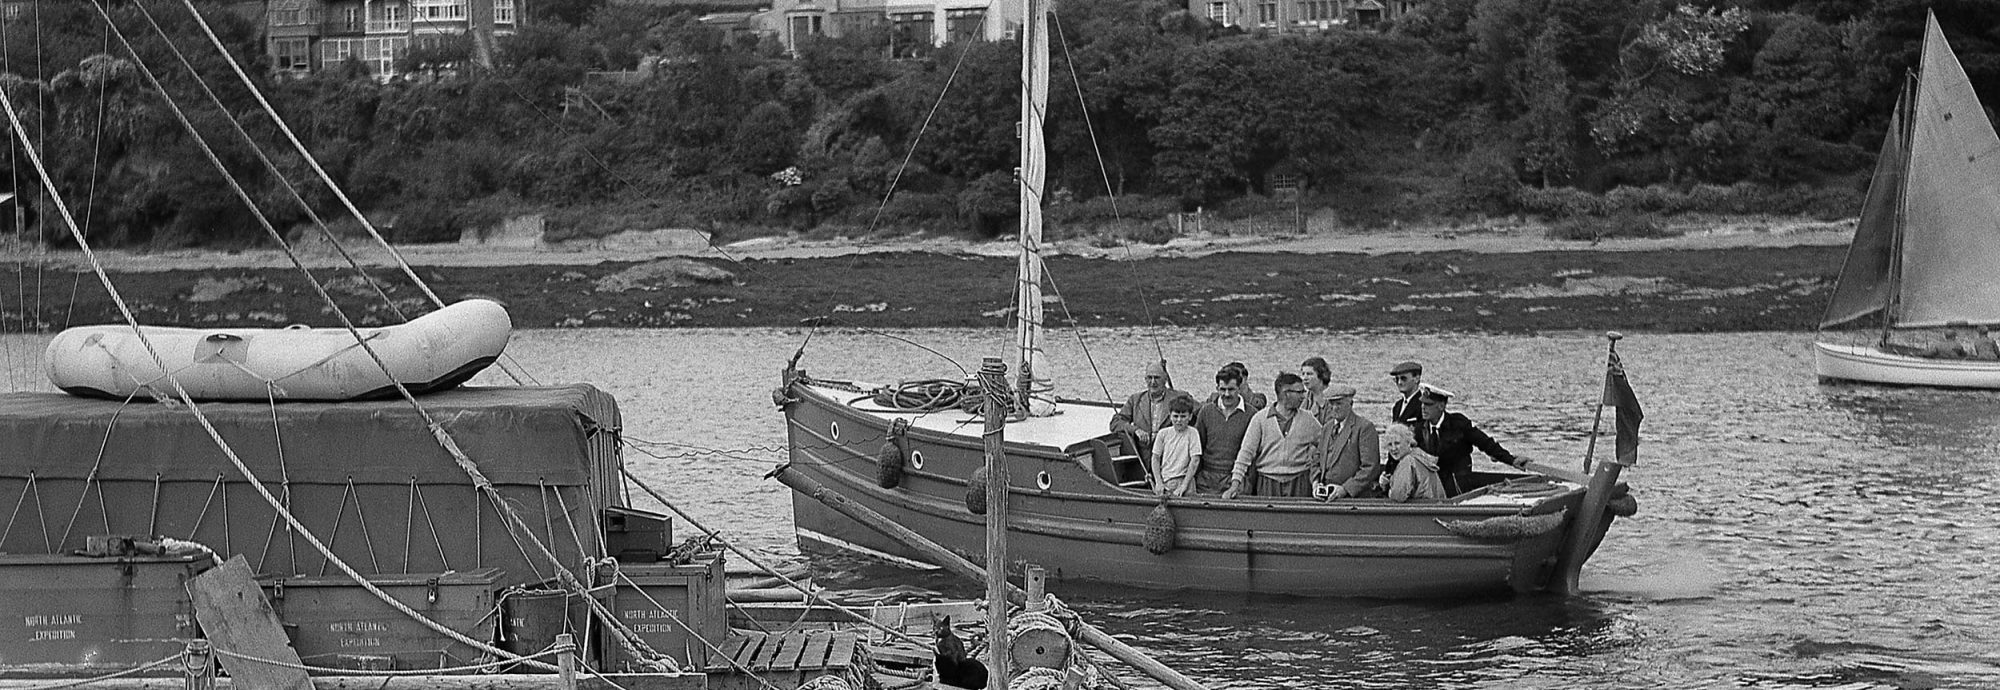 Black and white photo of the L'Egare and a boat carrying people who have come to have a look at it.